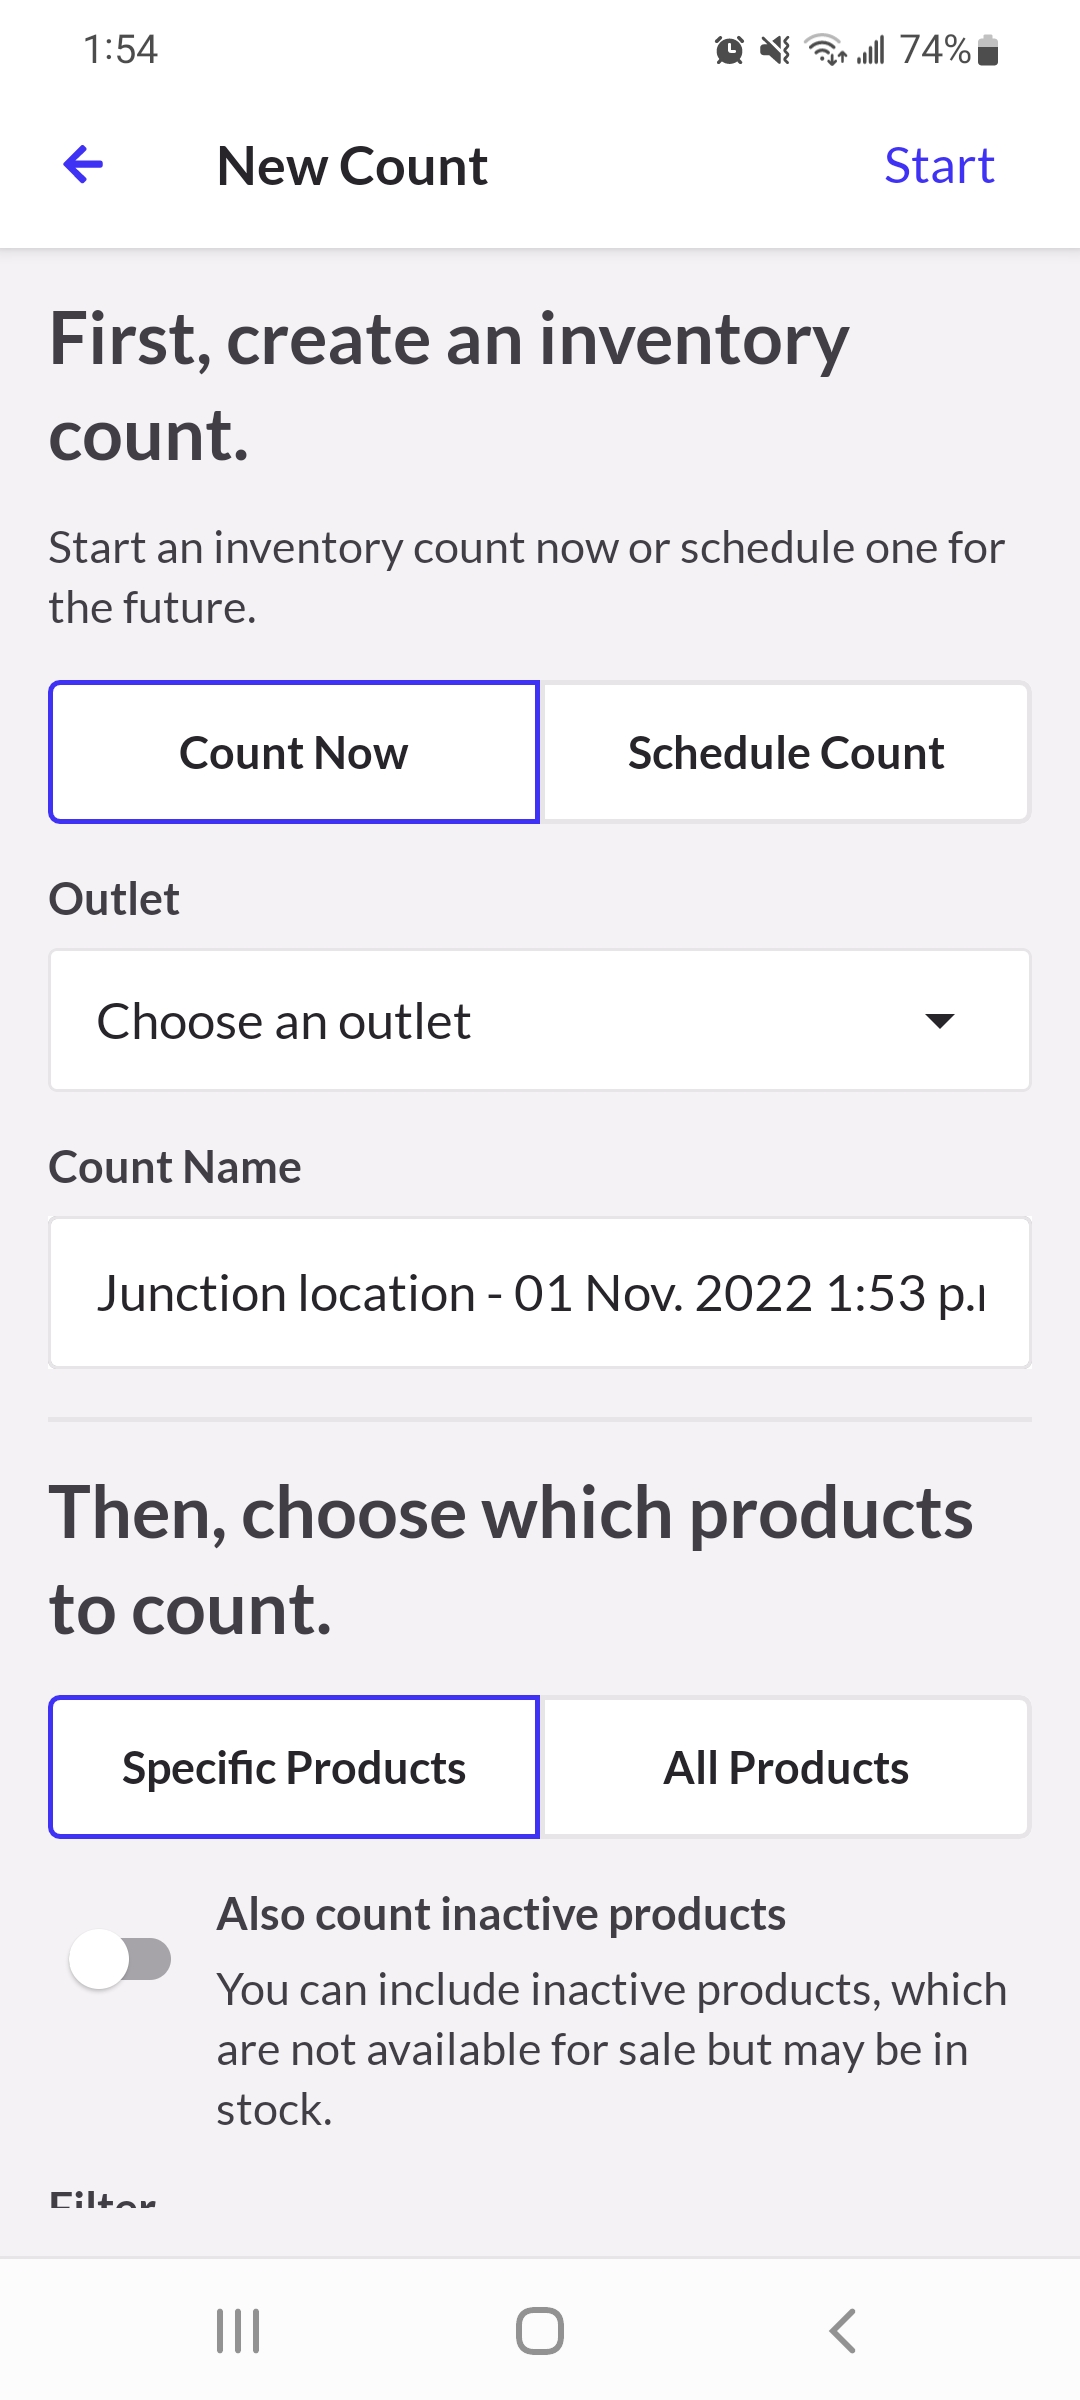 New count page with options to count now or later, location, and whether to do a partial count or full count.